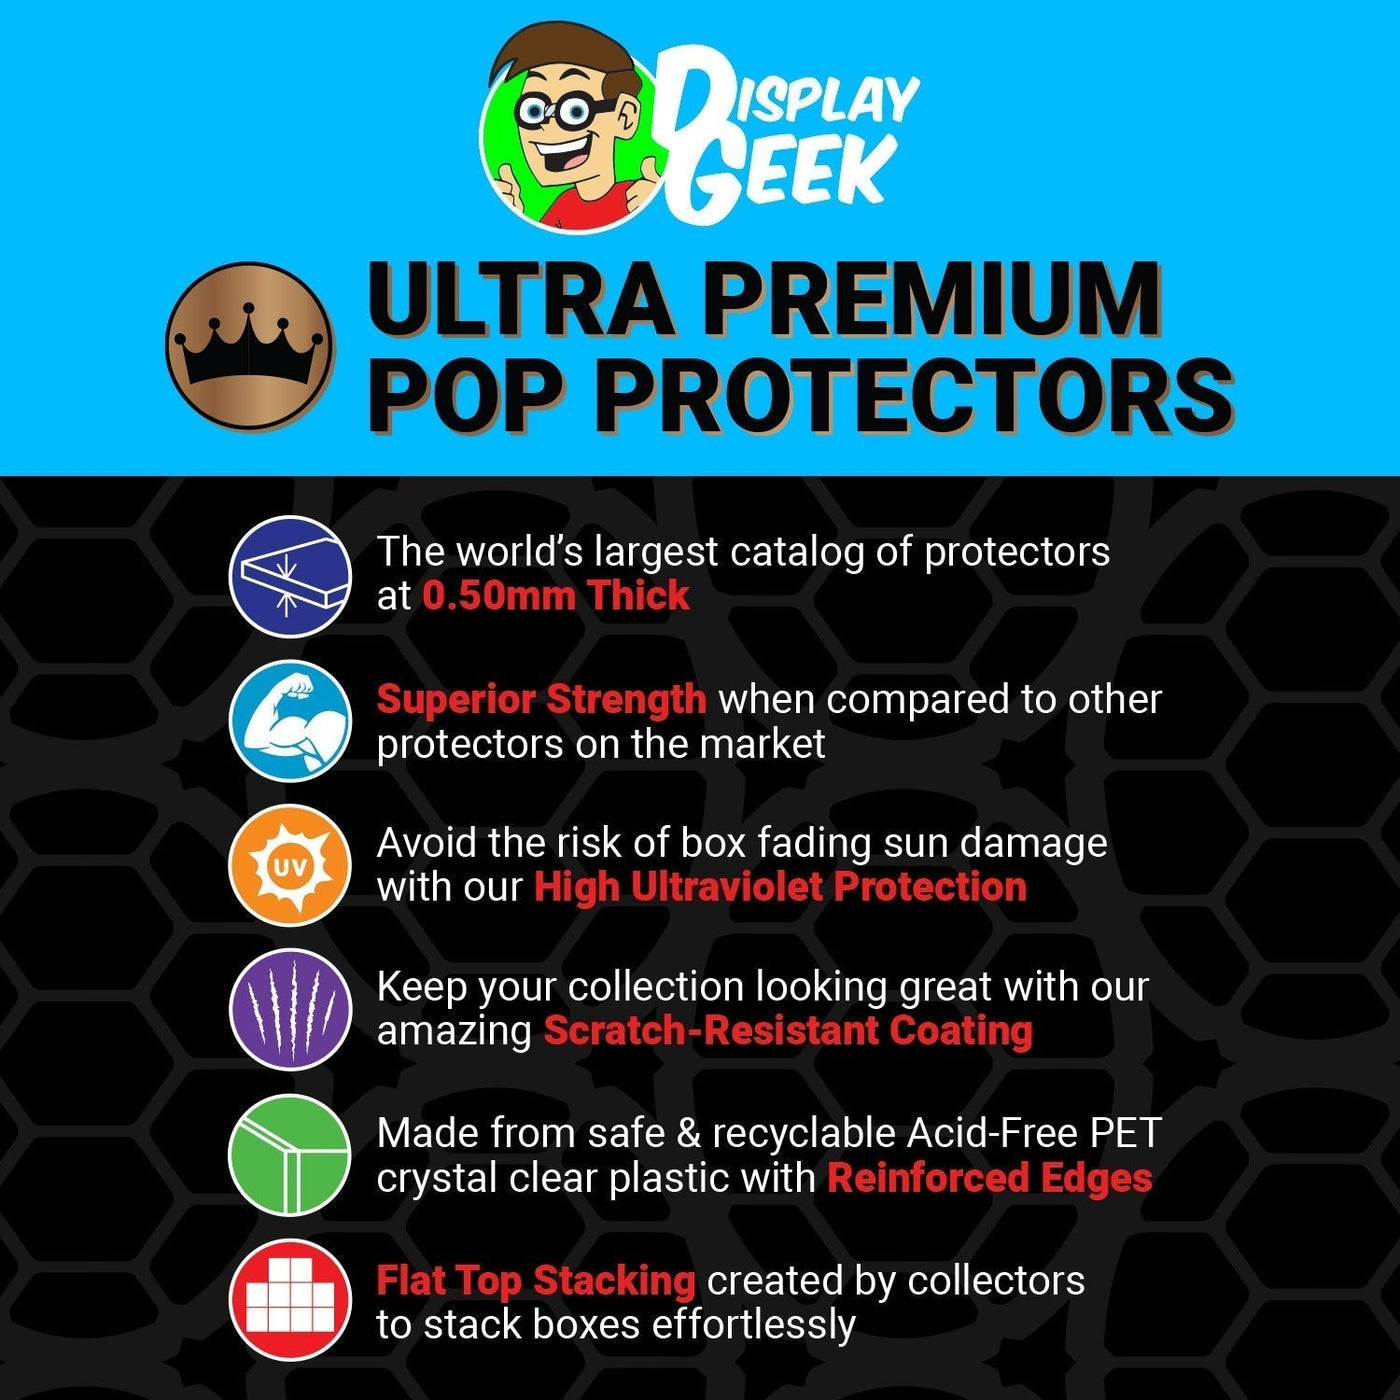 Pop Protector for 6 inch D.Va with MEKA Pink #177 Super Funko Pop on The Protector Guide App by Display Geek